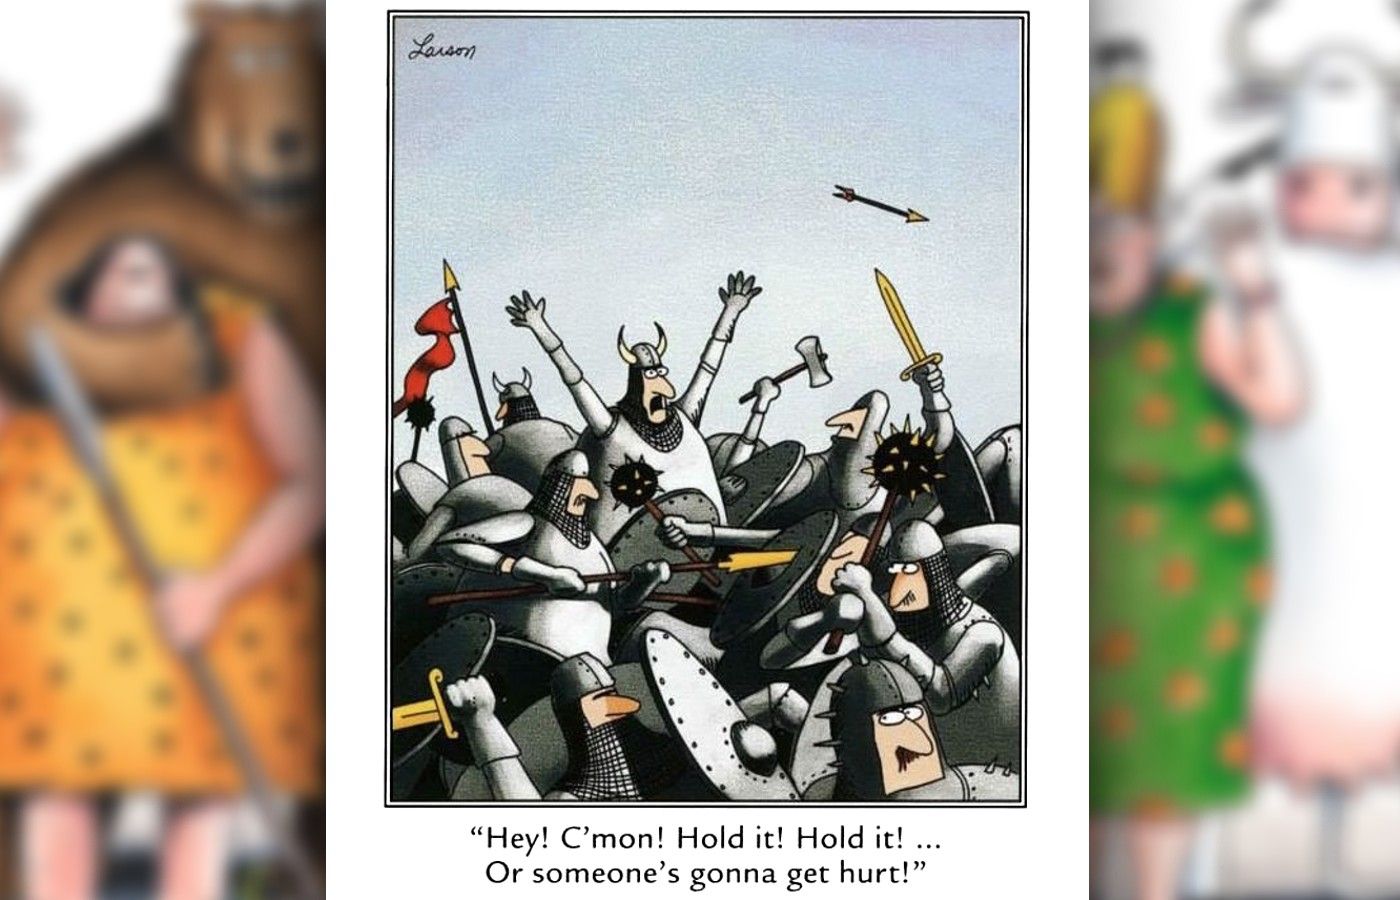 far side comic where a battle is called off in case someone gets hurt